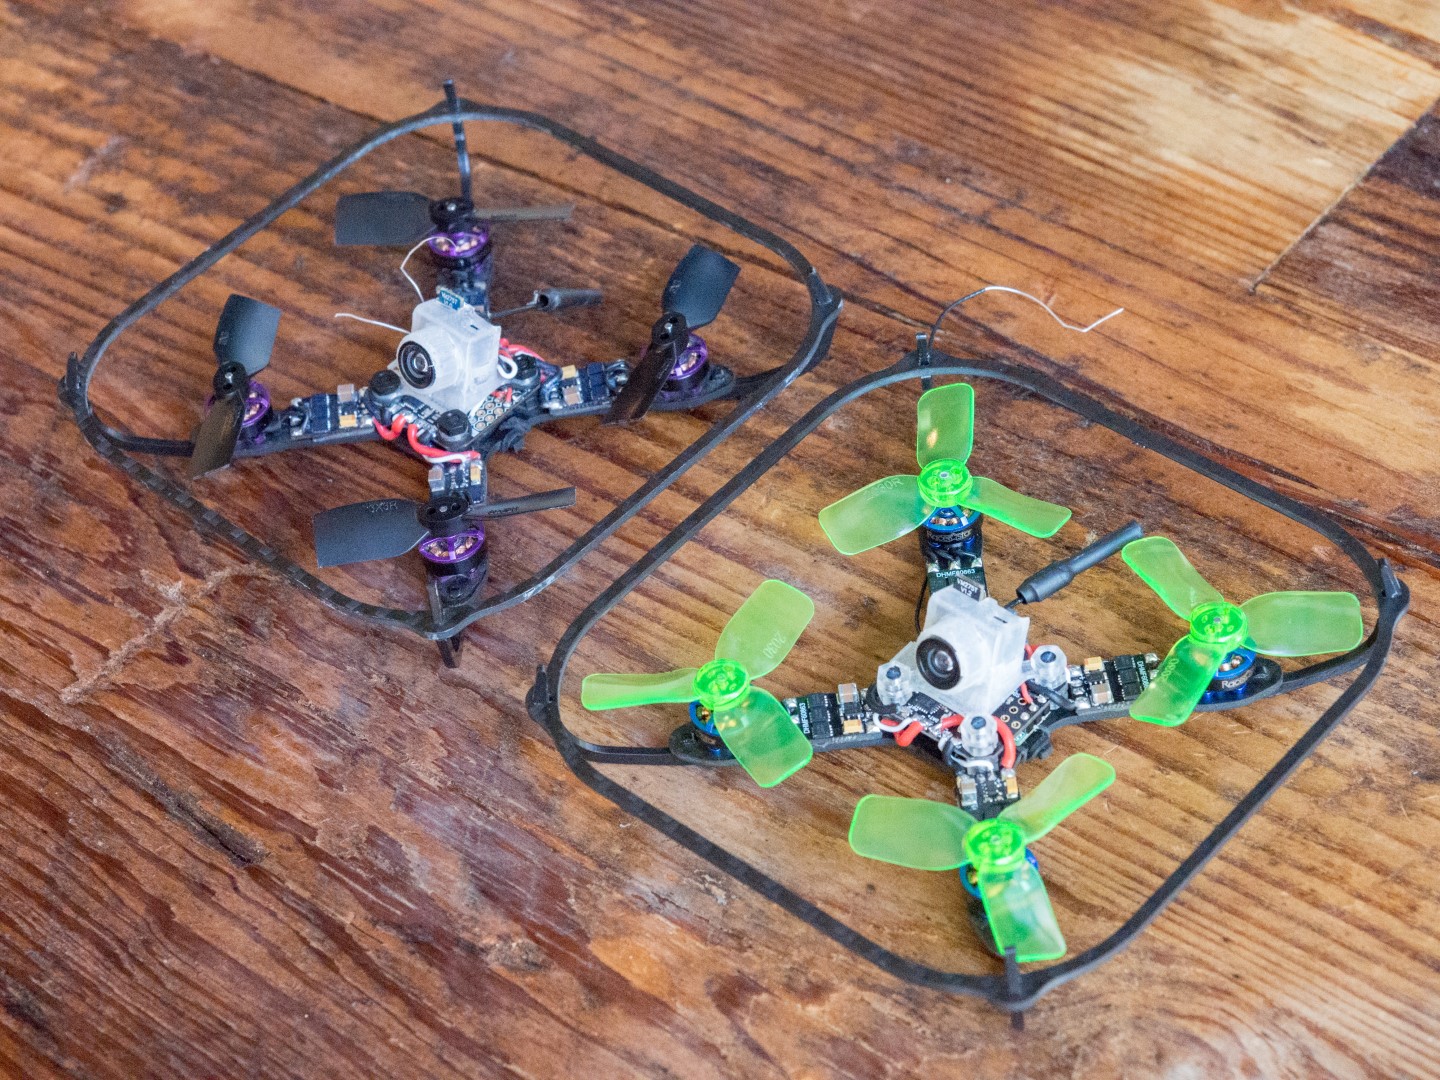 Hoverbot Quadcopters